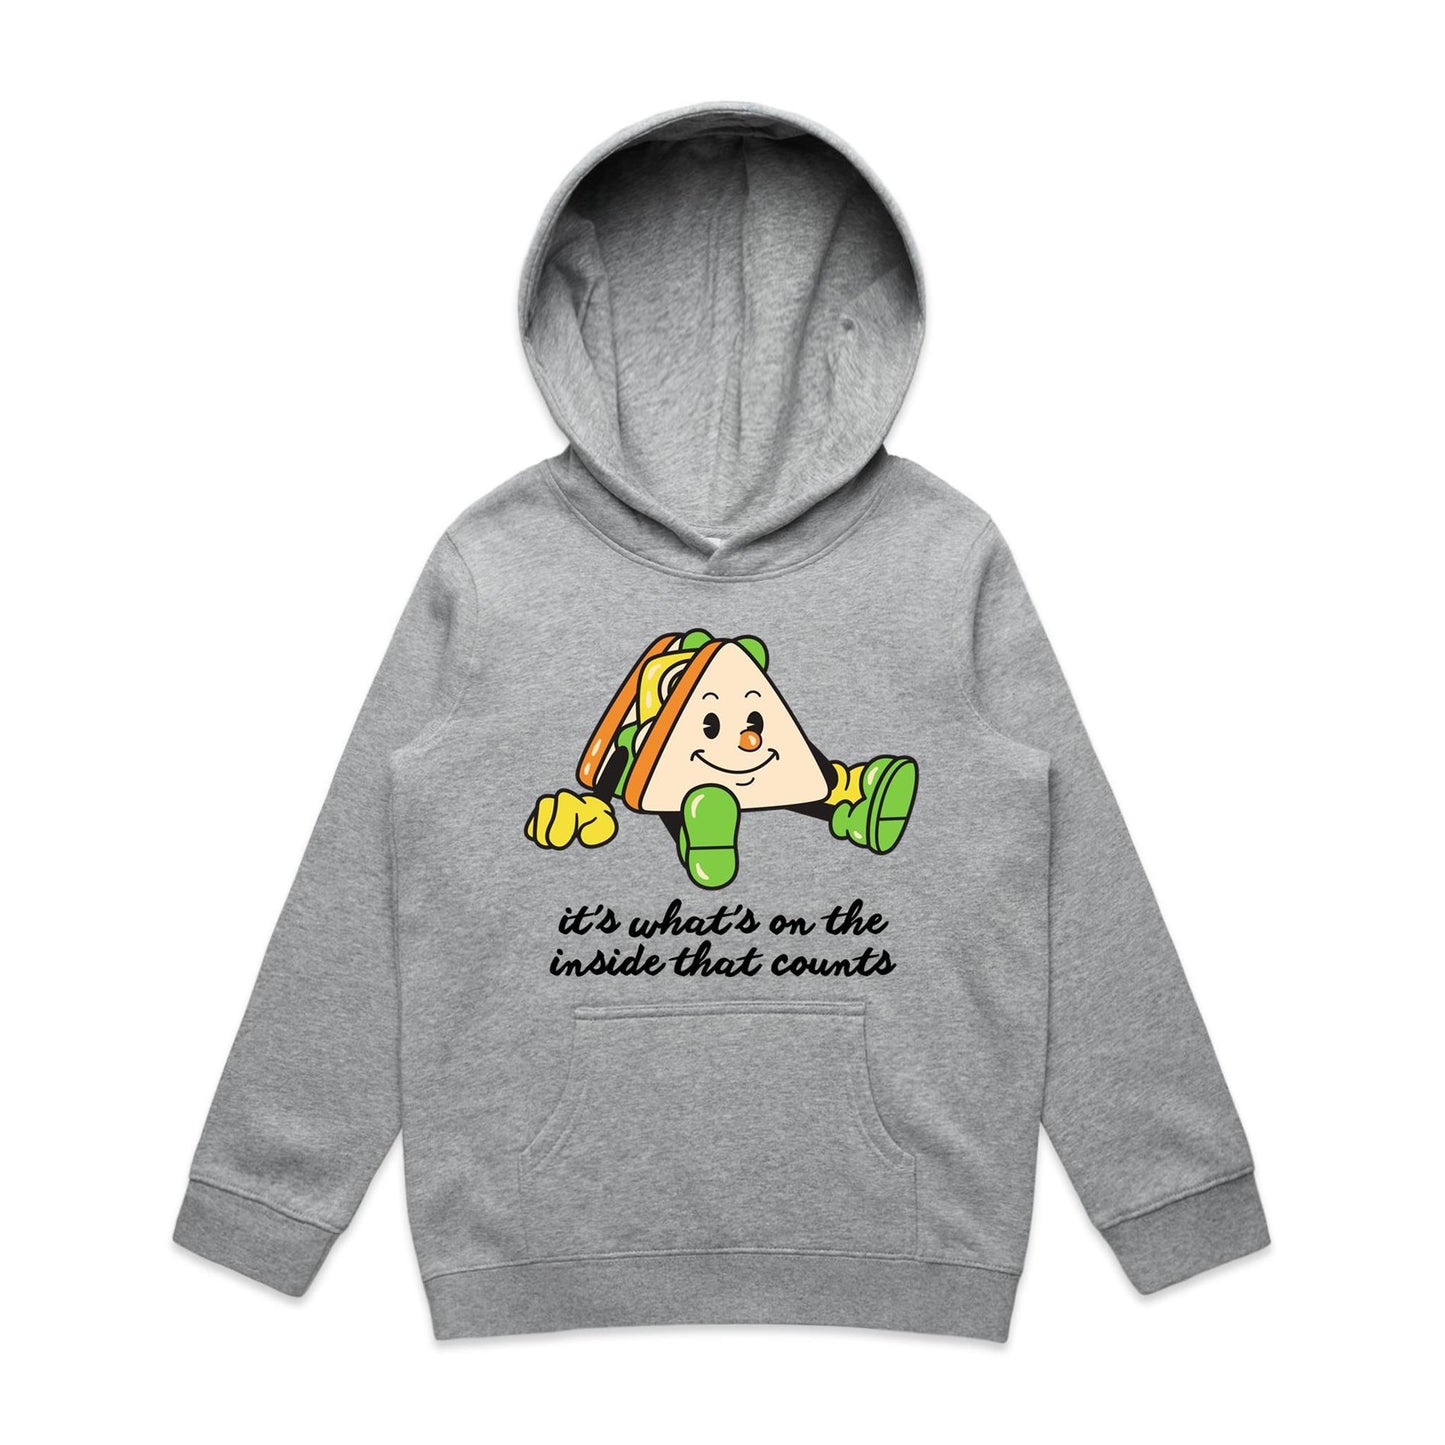 Sandwich, It's What's On The Inside That Counts - Youth Supply Hood Grey Marle Kids Hoodie Food Motivation